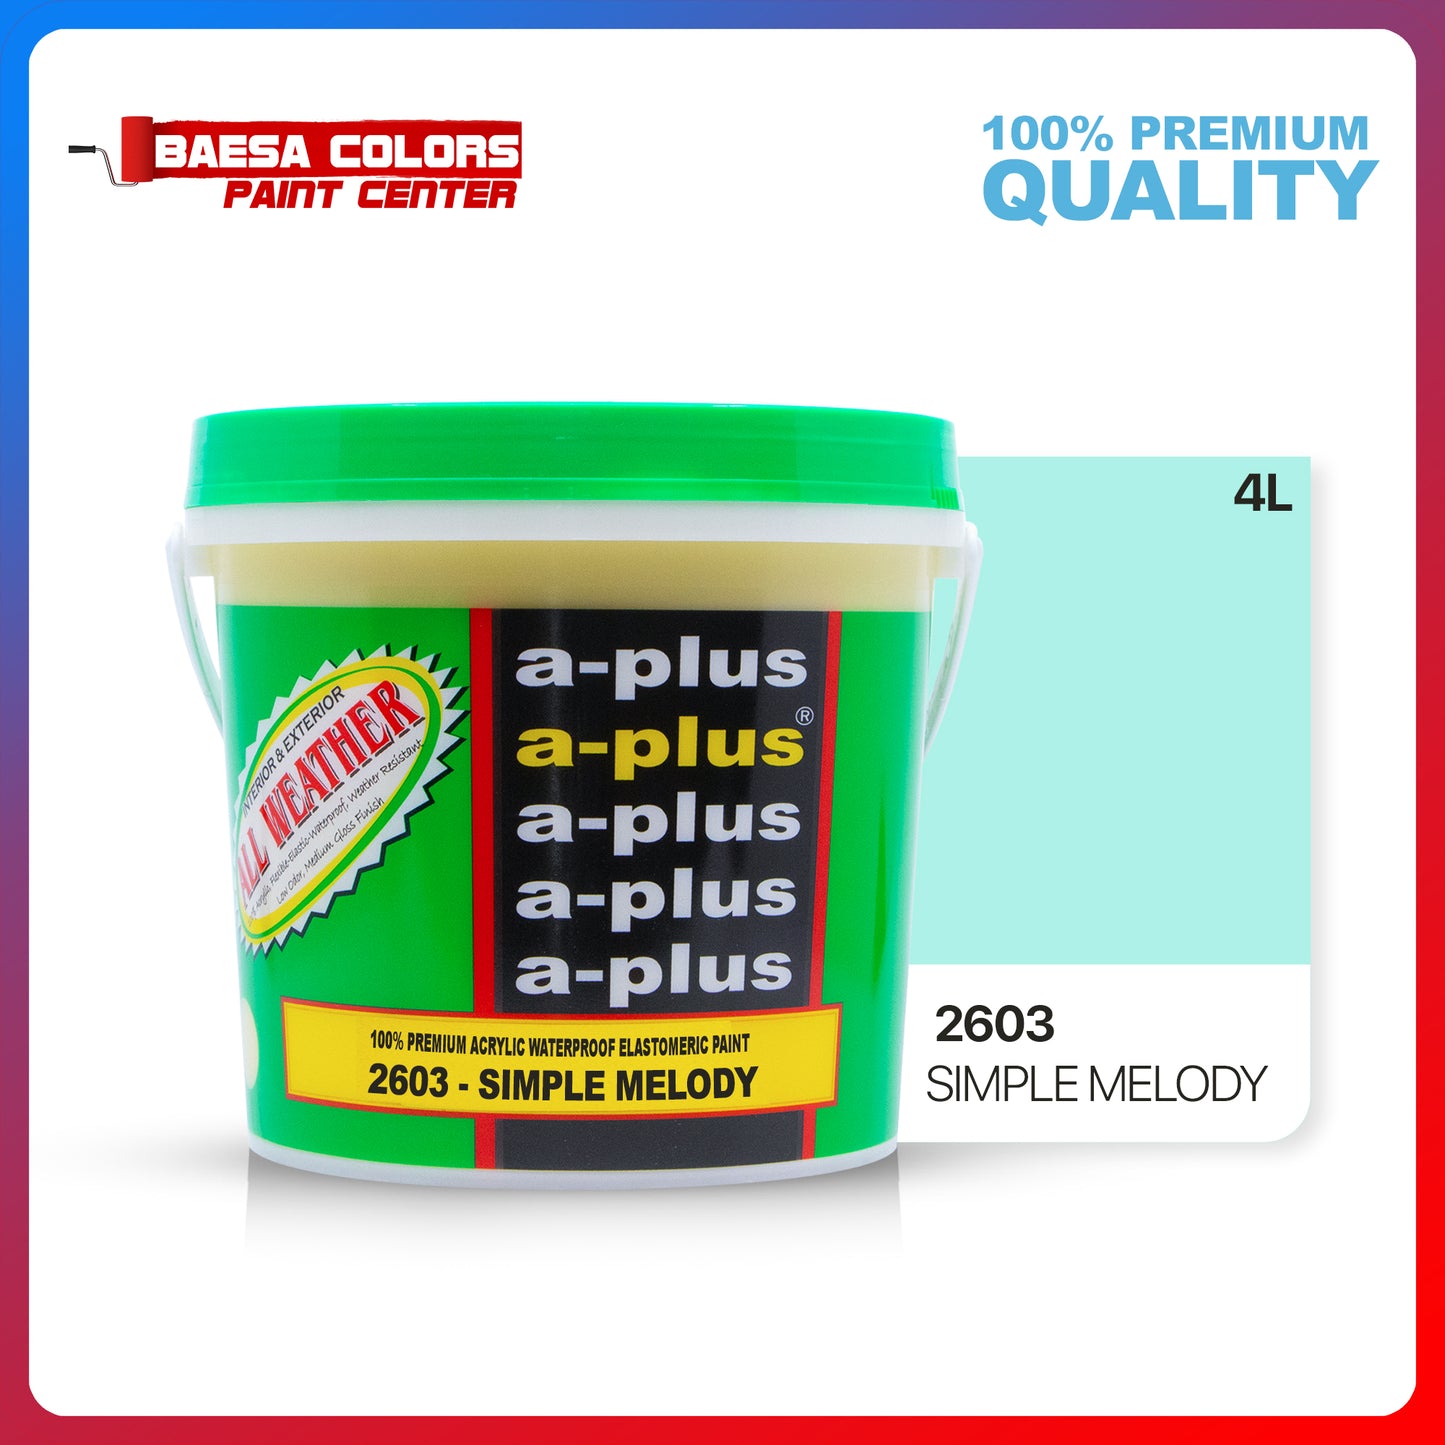 A-Plus All Weather® 2603 Simple Melody Elastomeric Paint